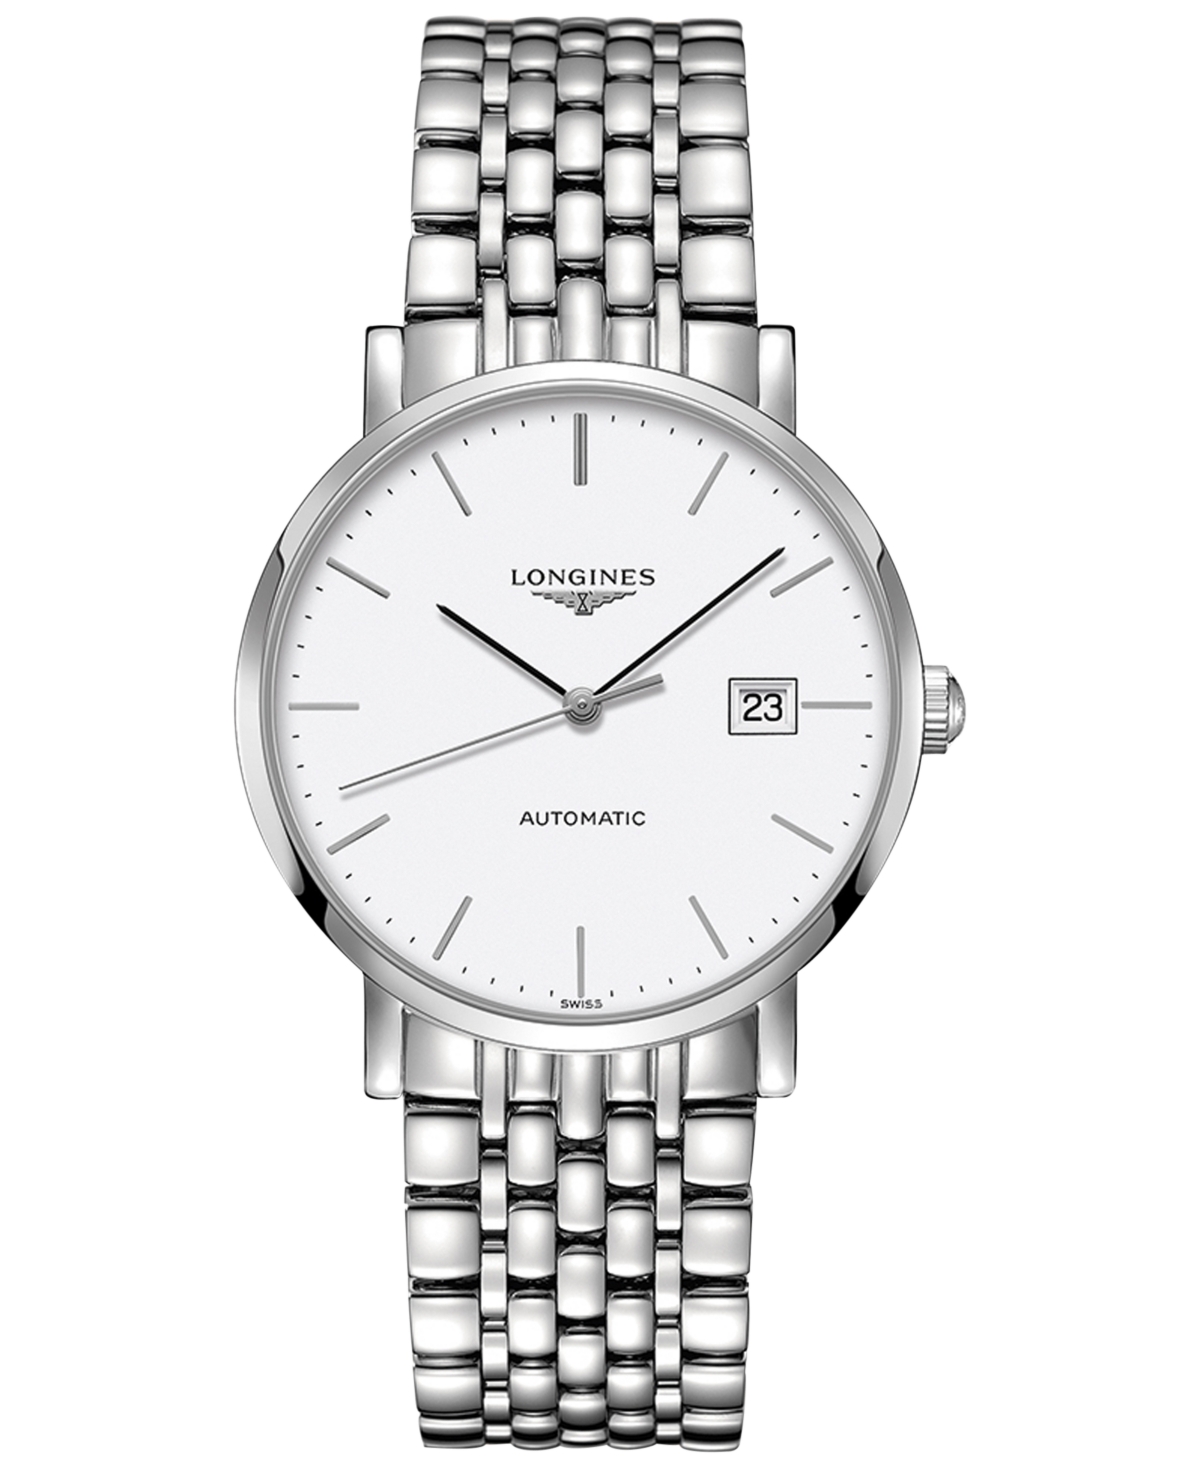 LONGINES MEN'S SWISS AUTOMATIC THE LONGINES ELEGANT COLLECTION STAINLESS STEEL BRACELET WATCH 39MM L49104126